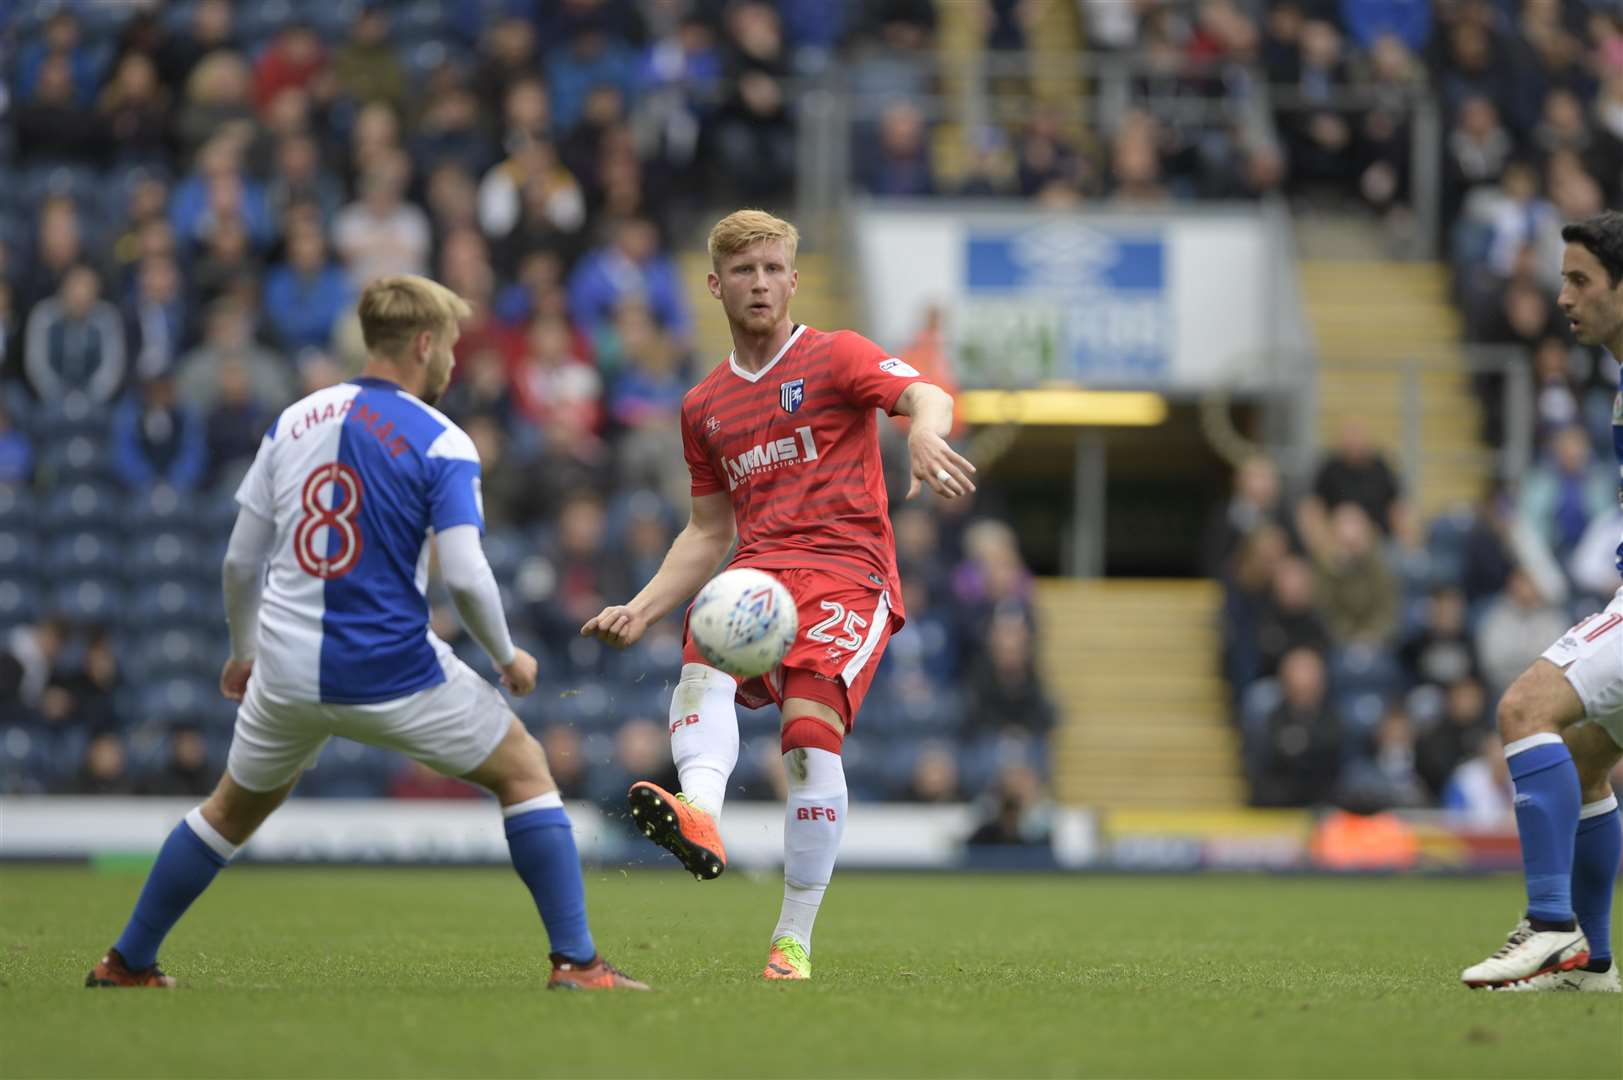 Finn O'Mara in action against Blackburn Rovers Picture: Barry Goodwin